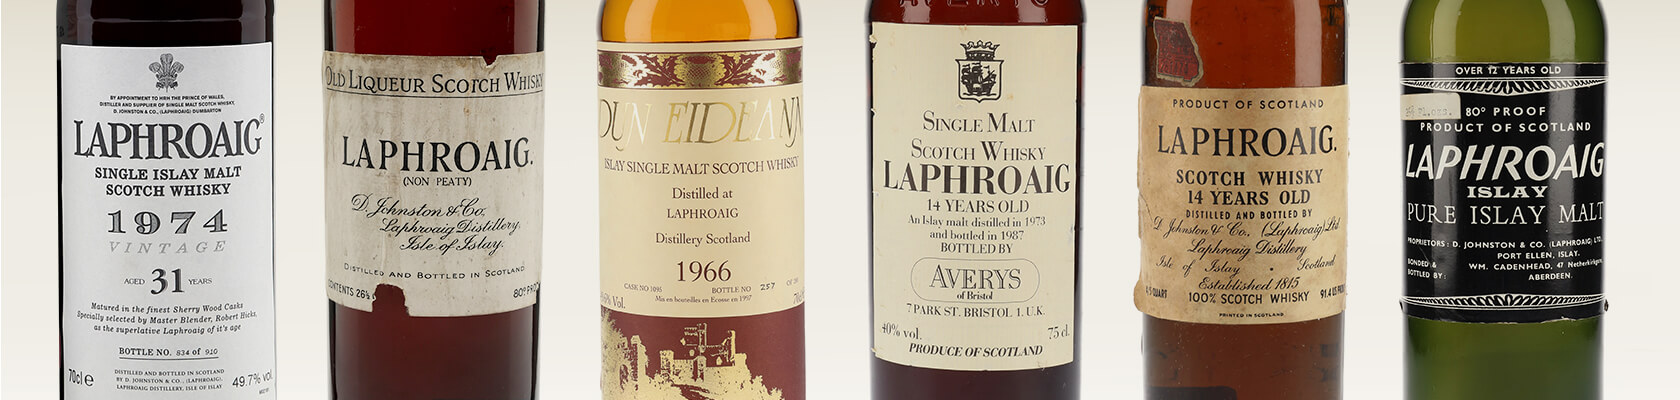 Most Wanted - Laphroaig